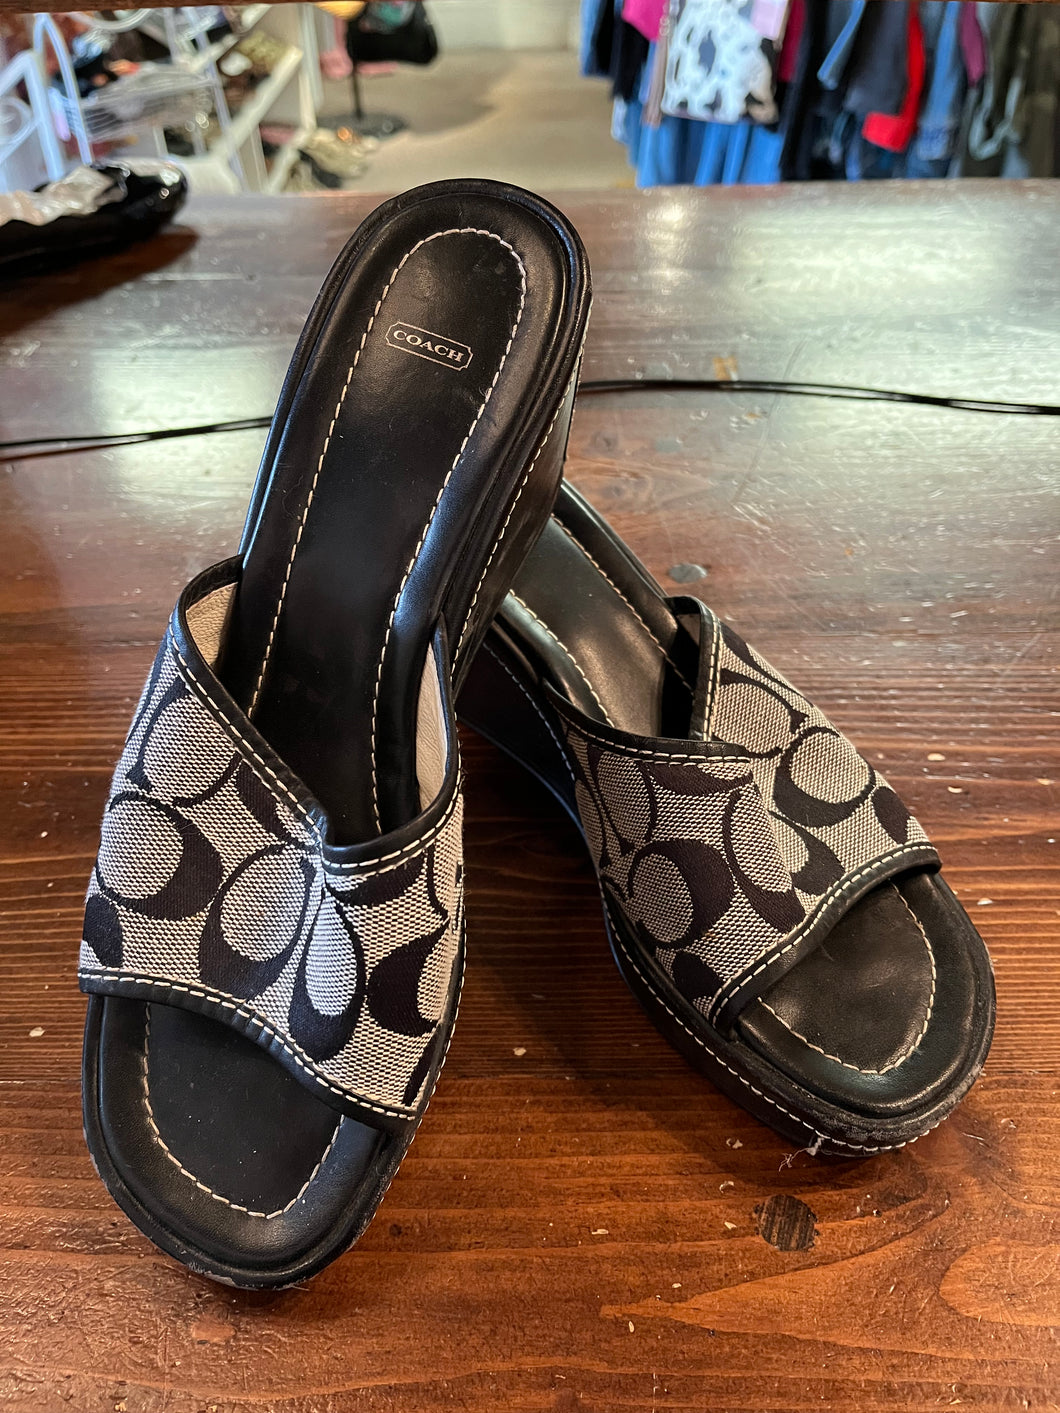 Coach Chunku Wedge Sandals (Size 8.5 - AS IS)